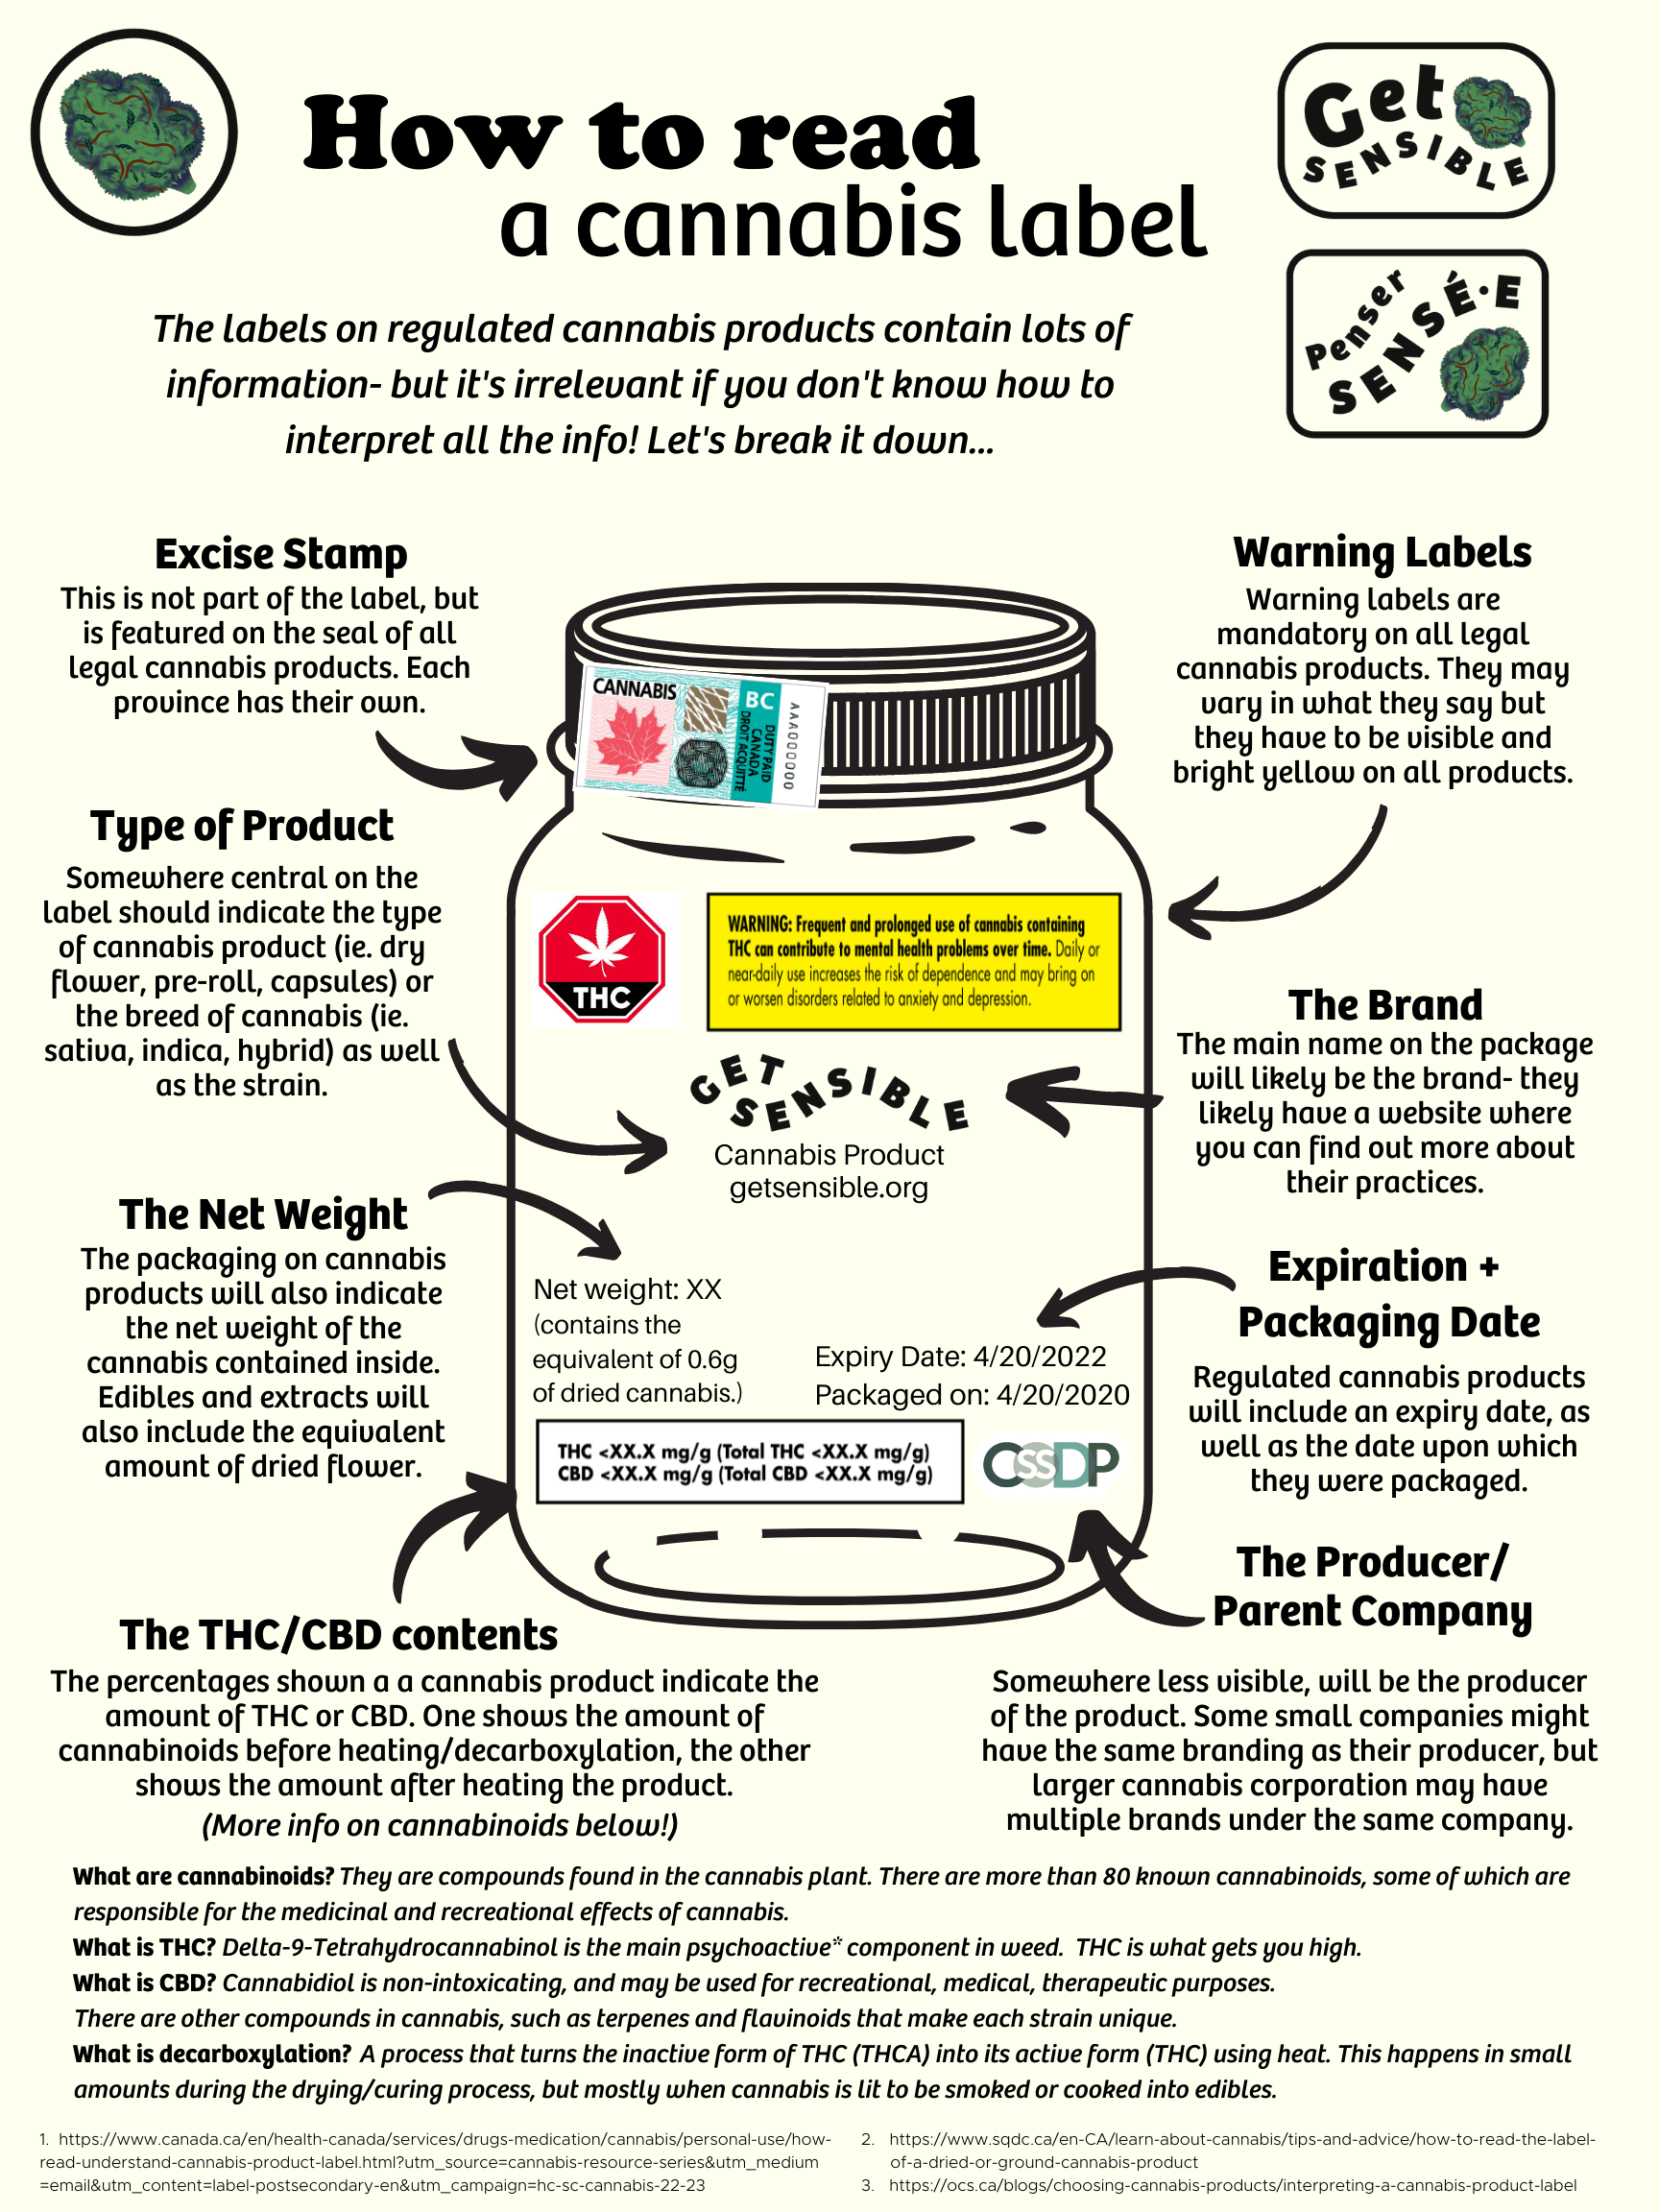 a cover image of an infographic on how to read cannabis retail labels